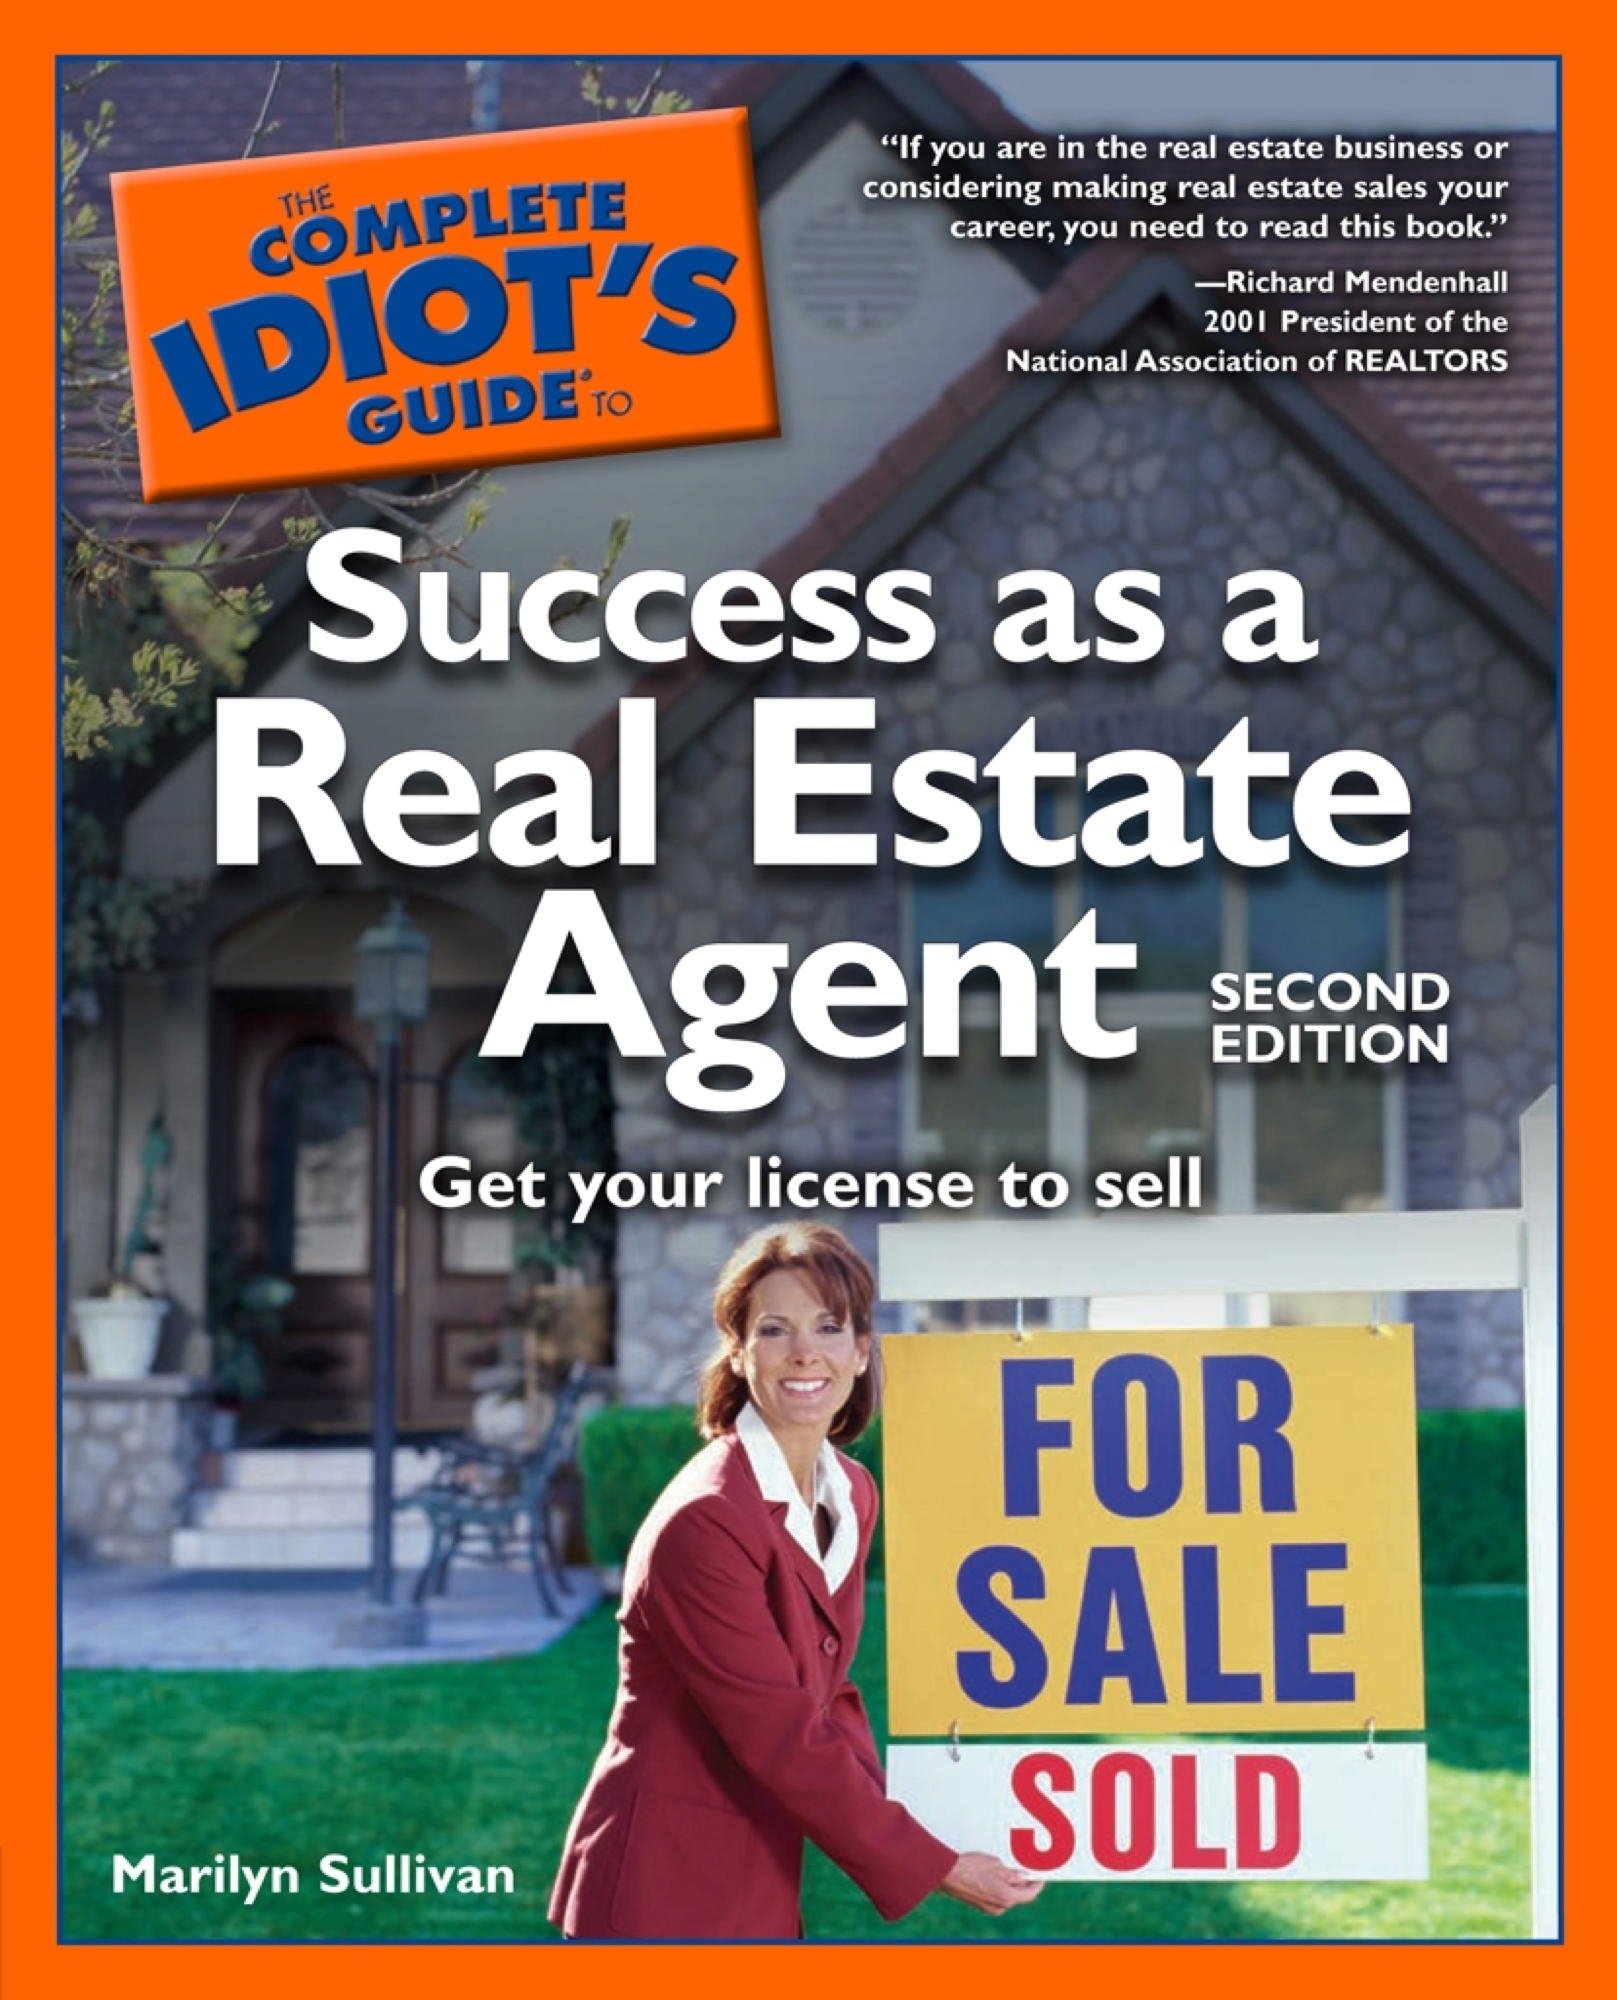 The Complete Idiot's Guide to Success as a Real Estate Agent, 2nd Edition